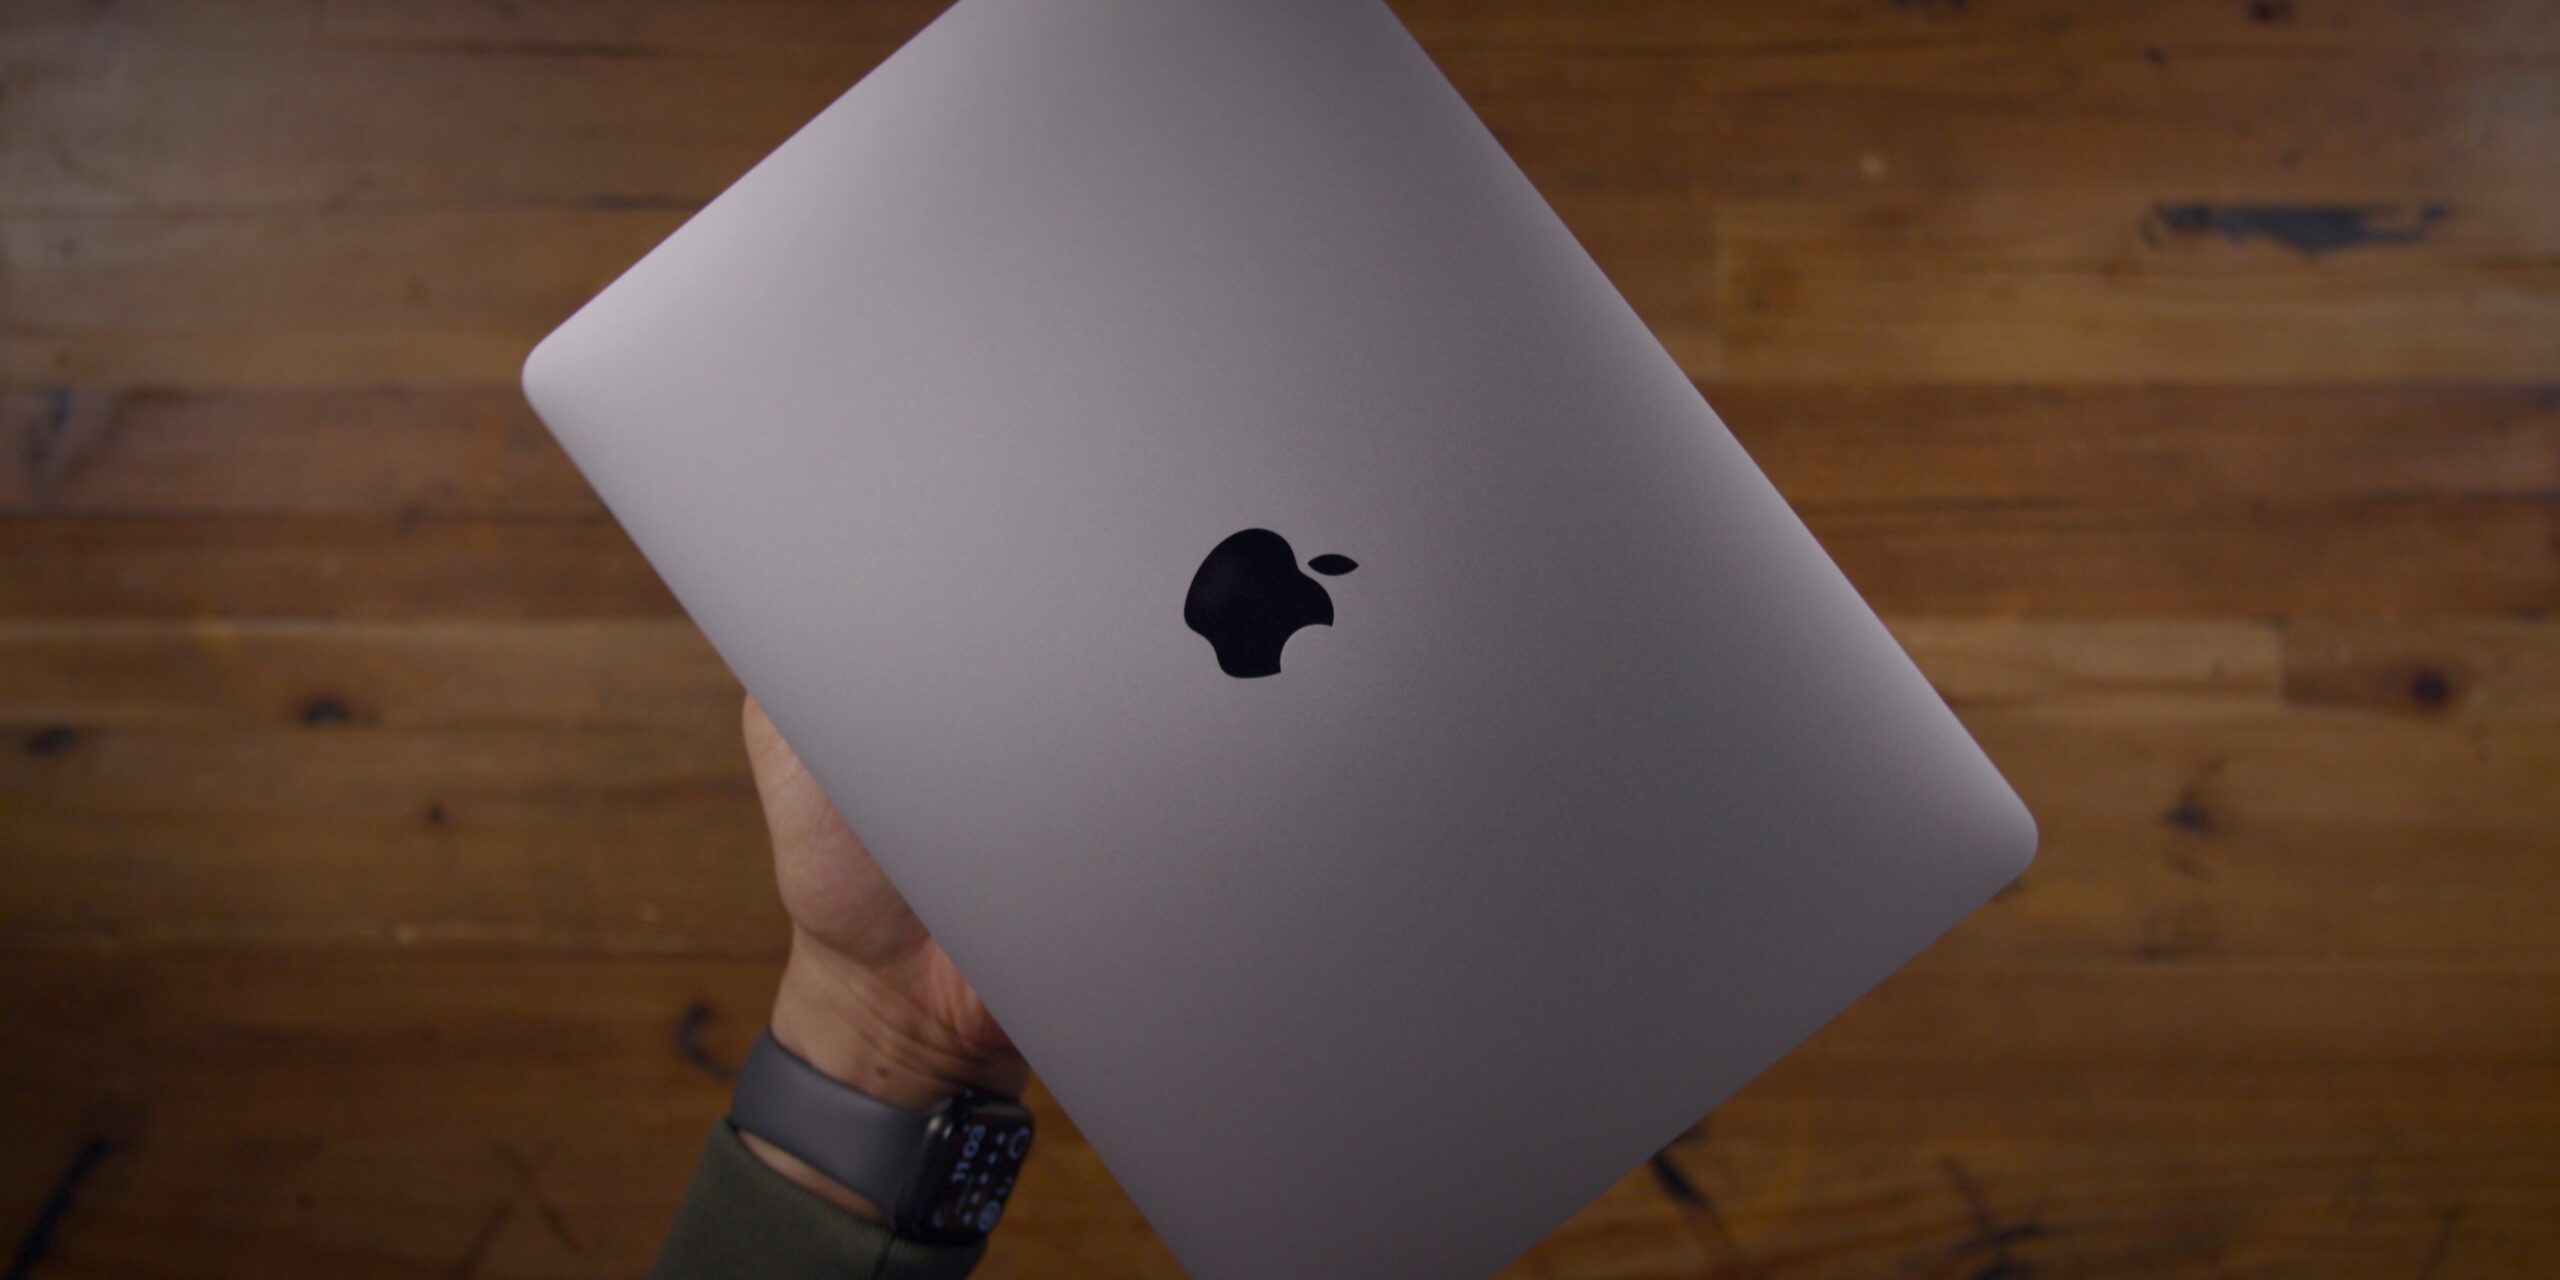 Regulatory filings reveal new 49.9Wh battery from Apple, could be for updated MacBook Air